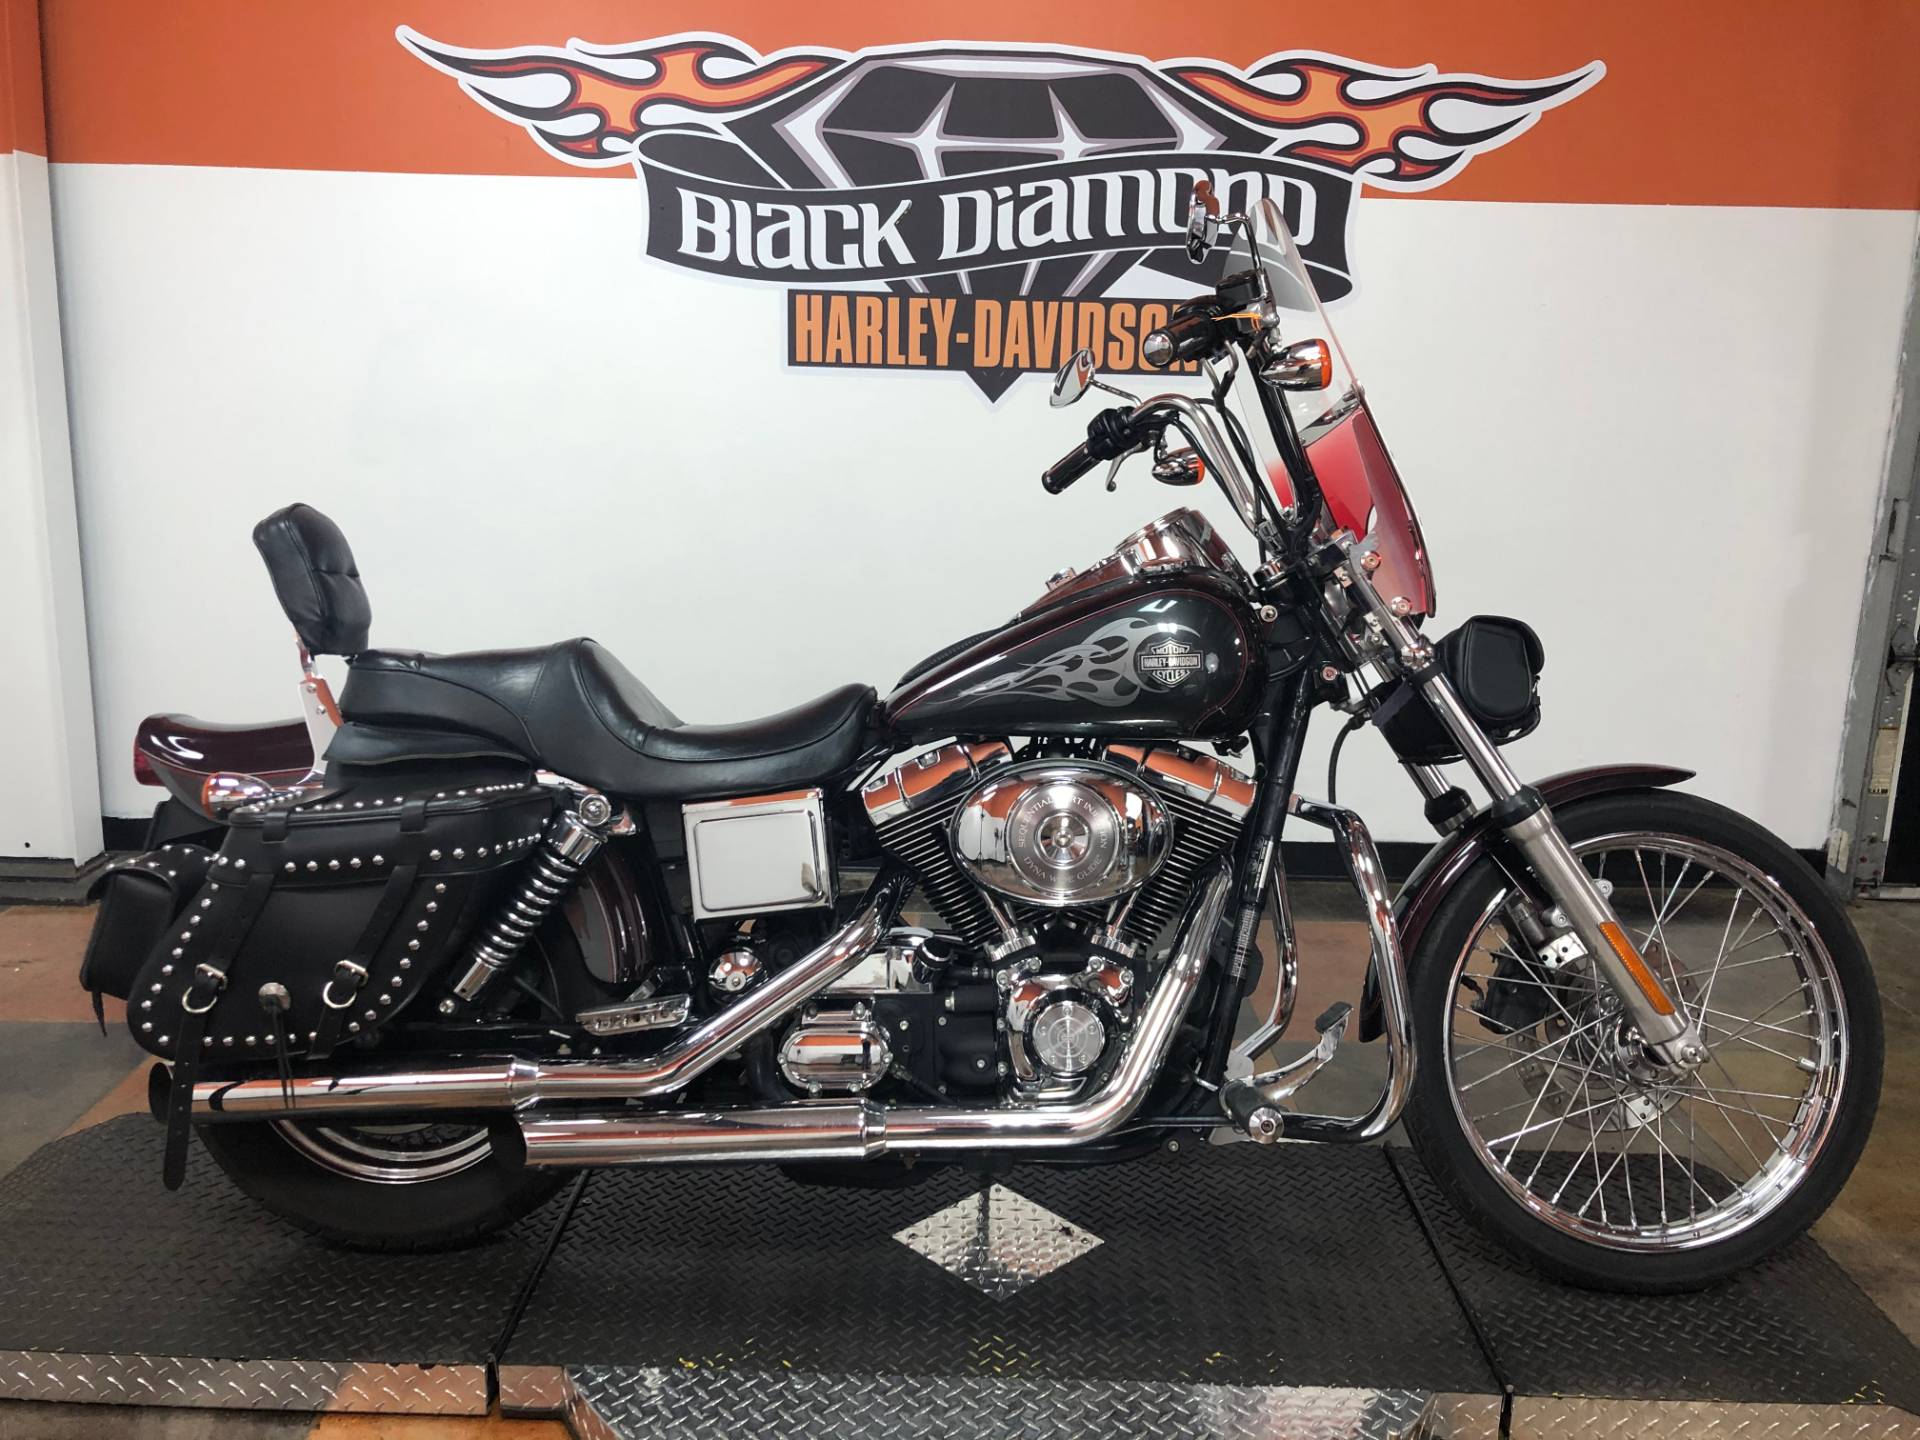 Used 2005 Harley Davidson Fxdwg Fxdwgi Dyna Wide Glide Two Tone Black Cherry Pearl Black Pearl Motorcycles In Mount Vernon Il U317674